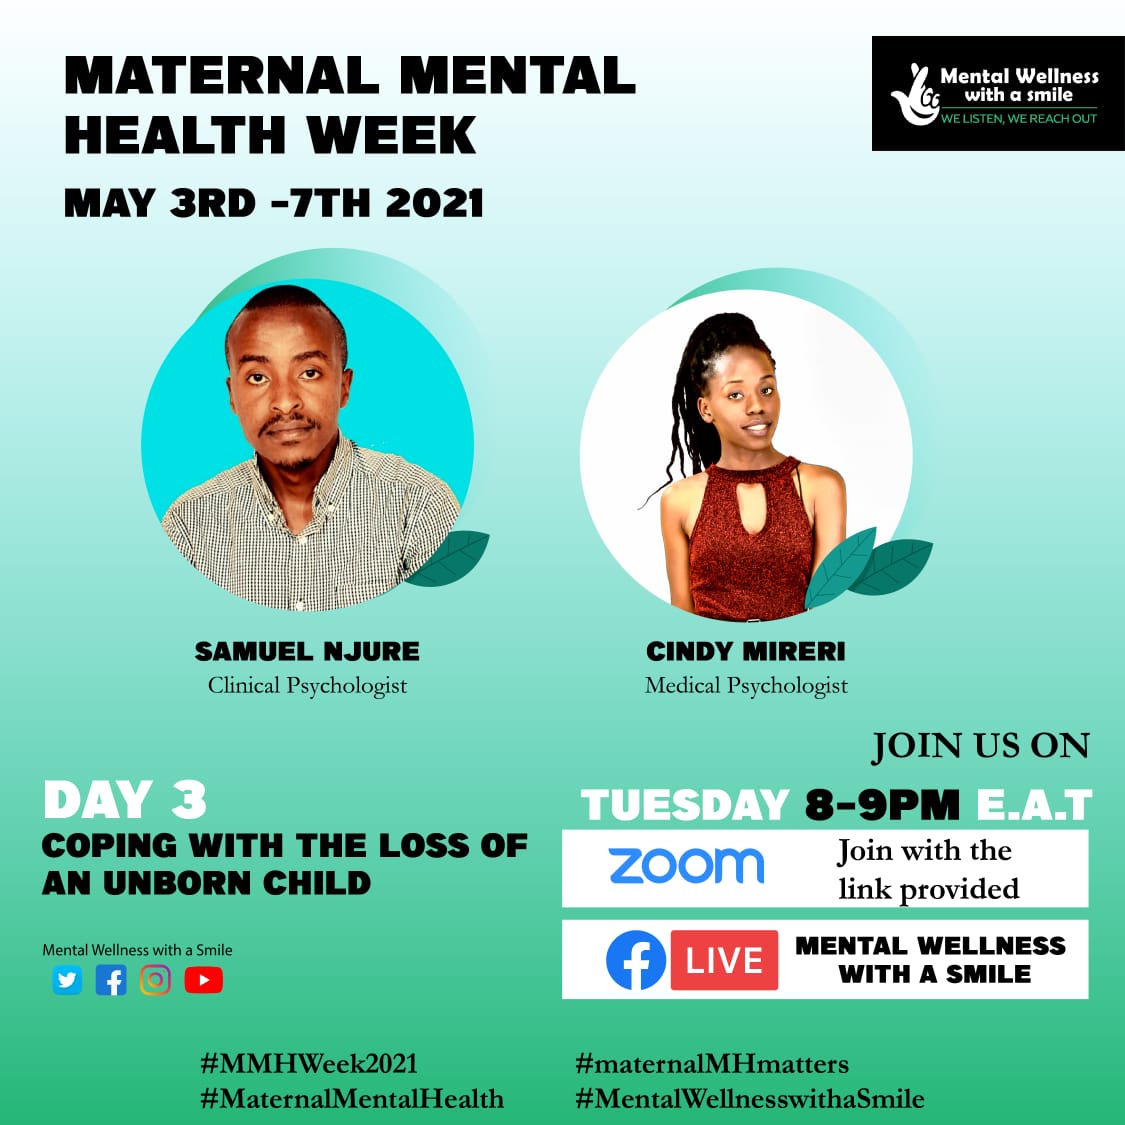 MENTAL WELLNESS WITH A SMILE is inviting you to a scheduled Zoom meeting.
Topic: COPING WITH THE LOSS OF AN UNBORN CHILD
Time: May 4, 2021 8:00 PM Nairobi
us02web.zoom.us/j/81085069797
#MMHWeek2021
#maternalMHmatters
#MaternalMentalHealth
#MentalWellnesswithaSmile 
#MentalHealthMatters